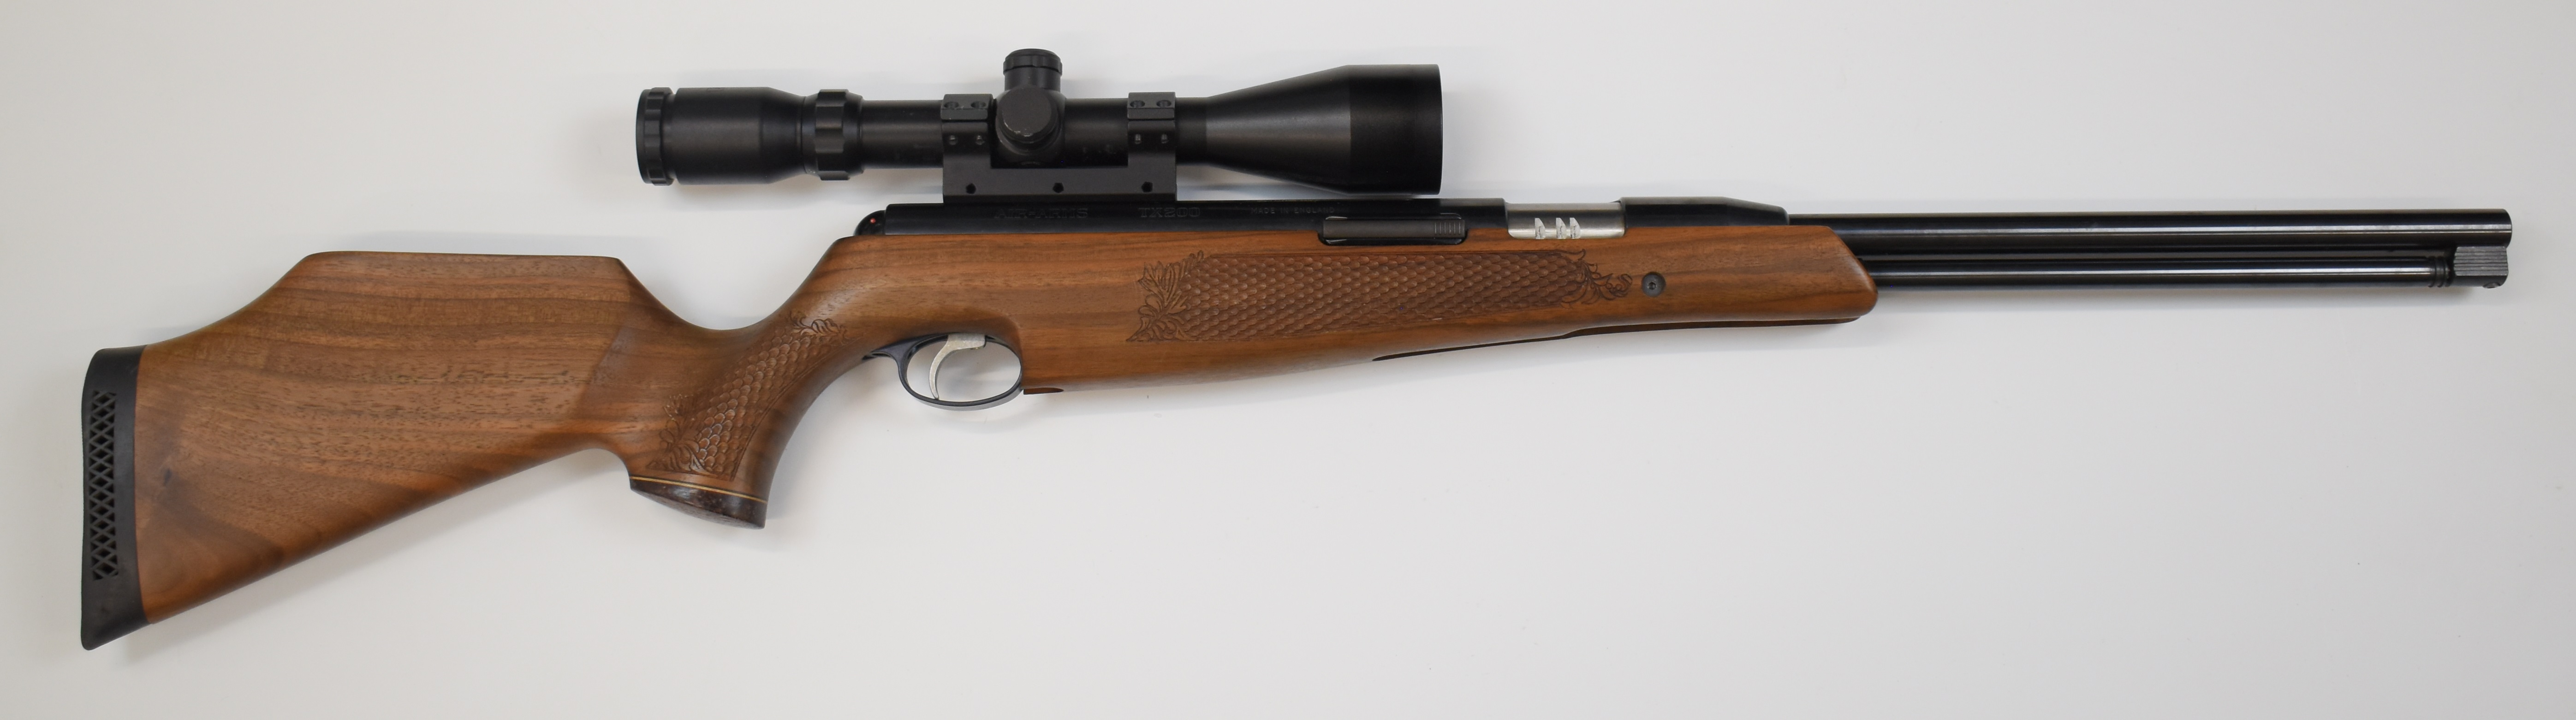 Air Arms TX200 .22 under-lever air rifle with carved semi-pistol grip and forend, adjustable - Image 2 of 9